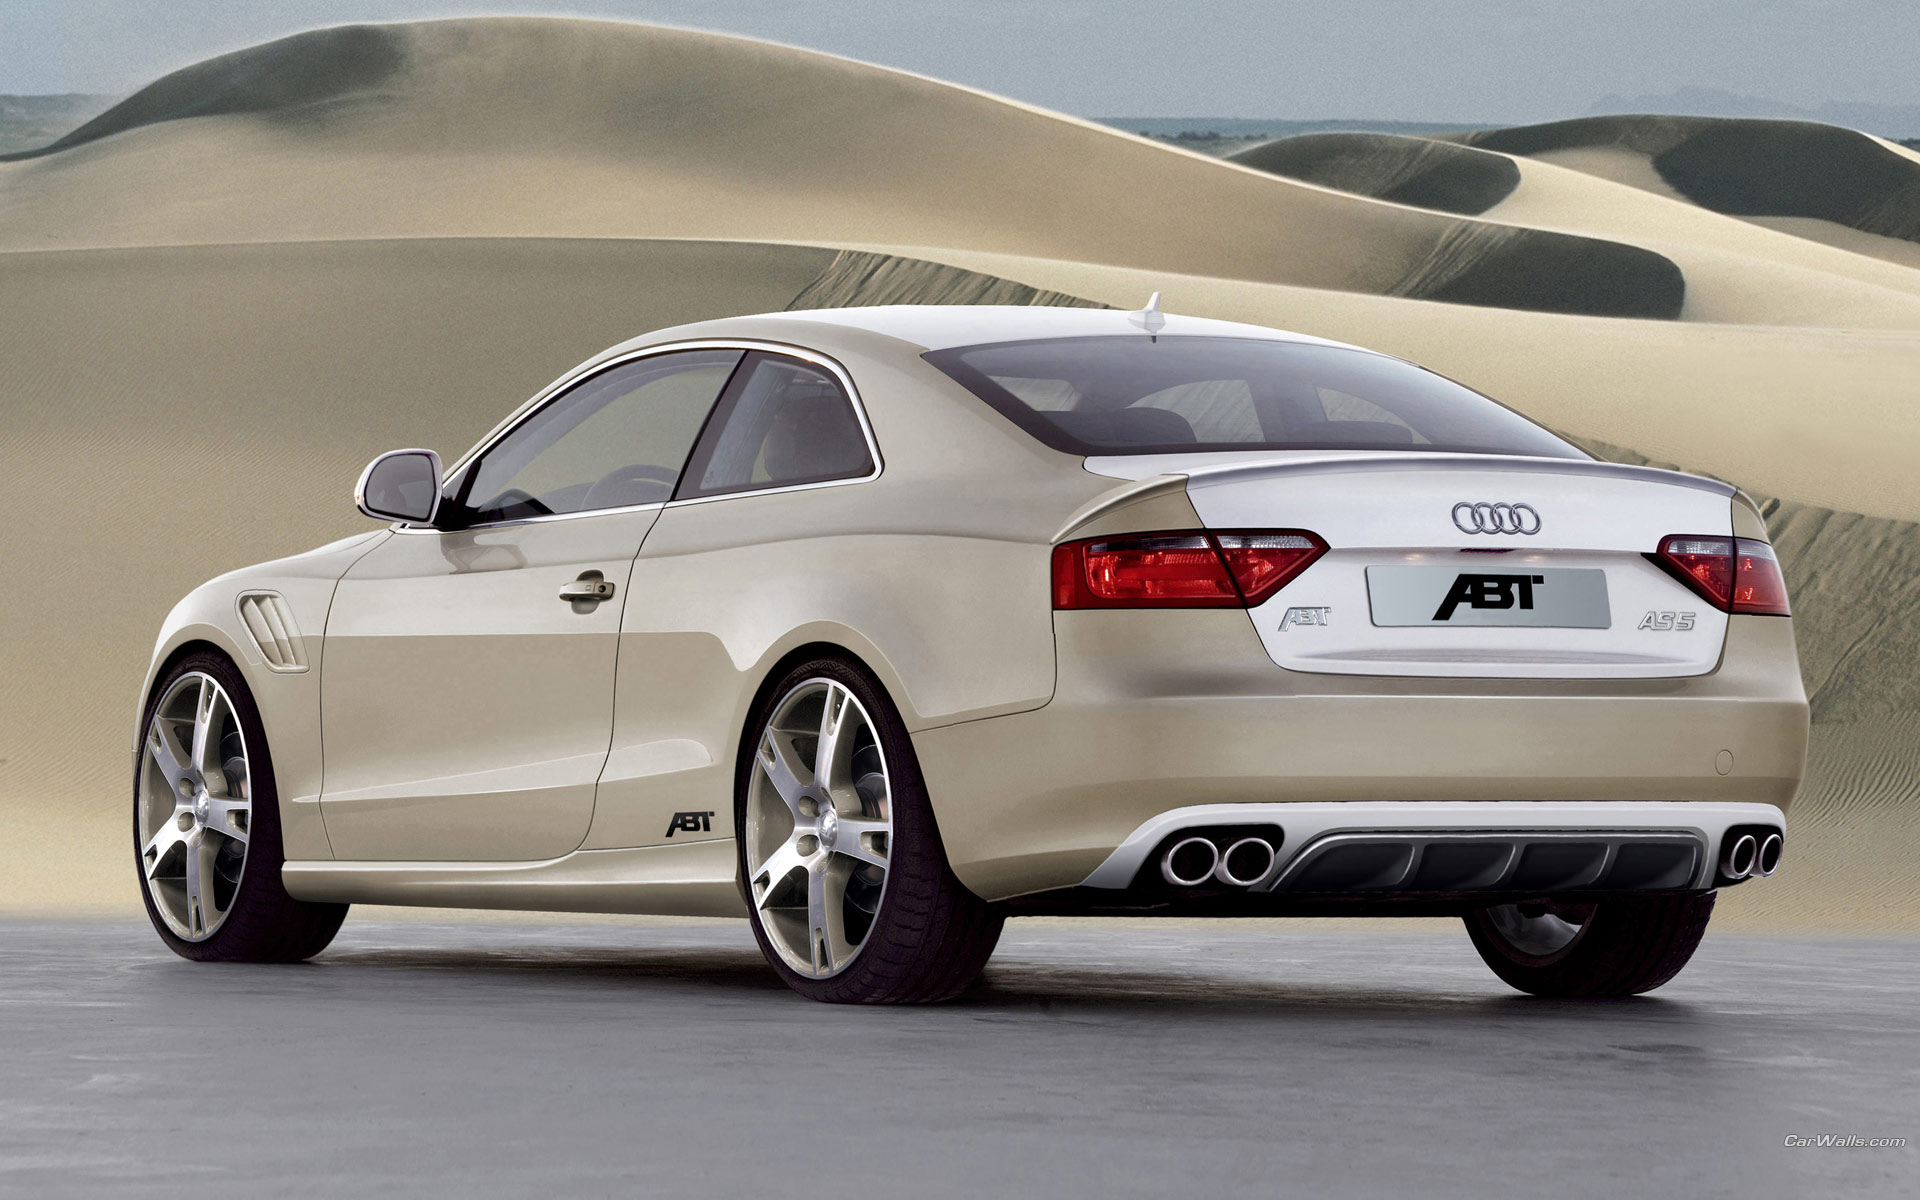 Download full size AS5 ABT back Audi wallpaper / 1920x1200